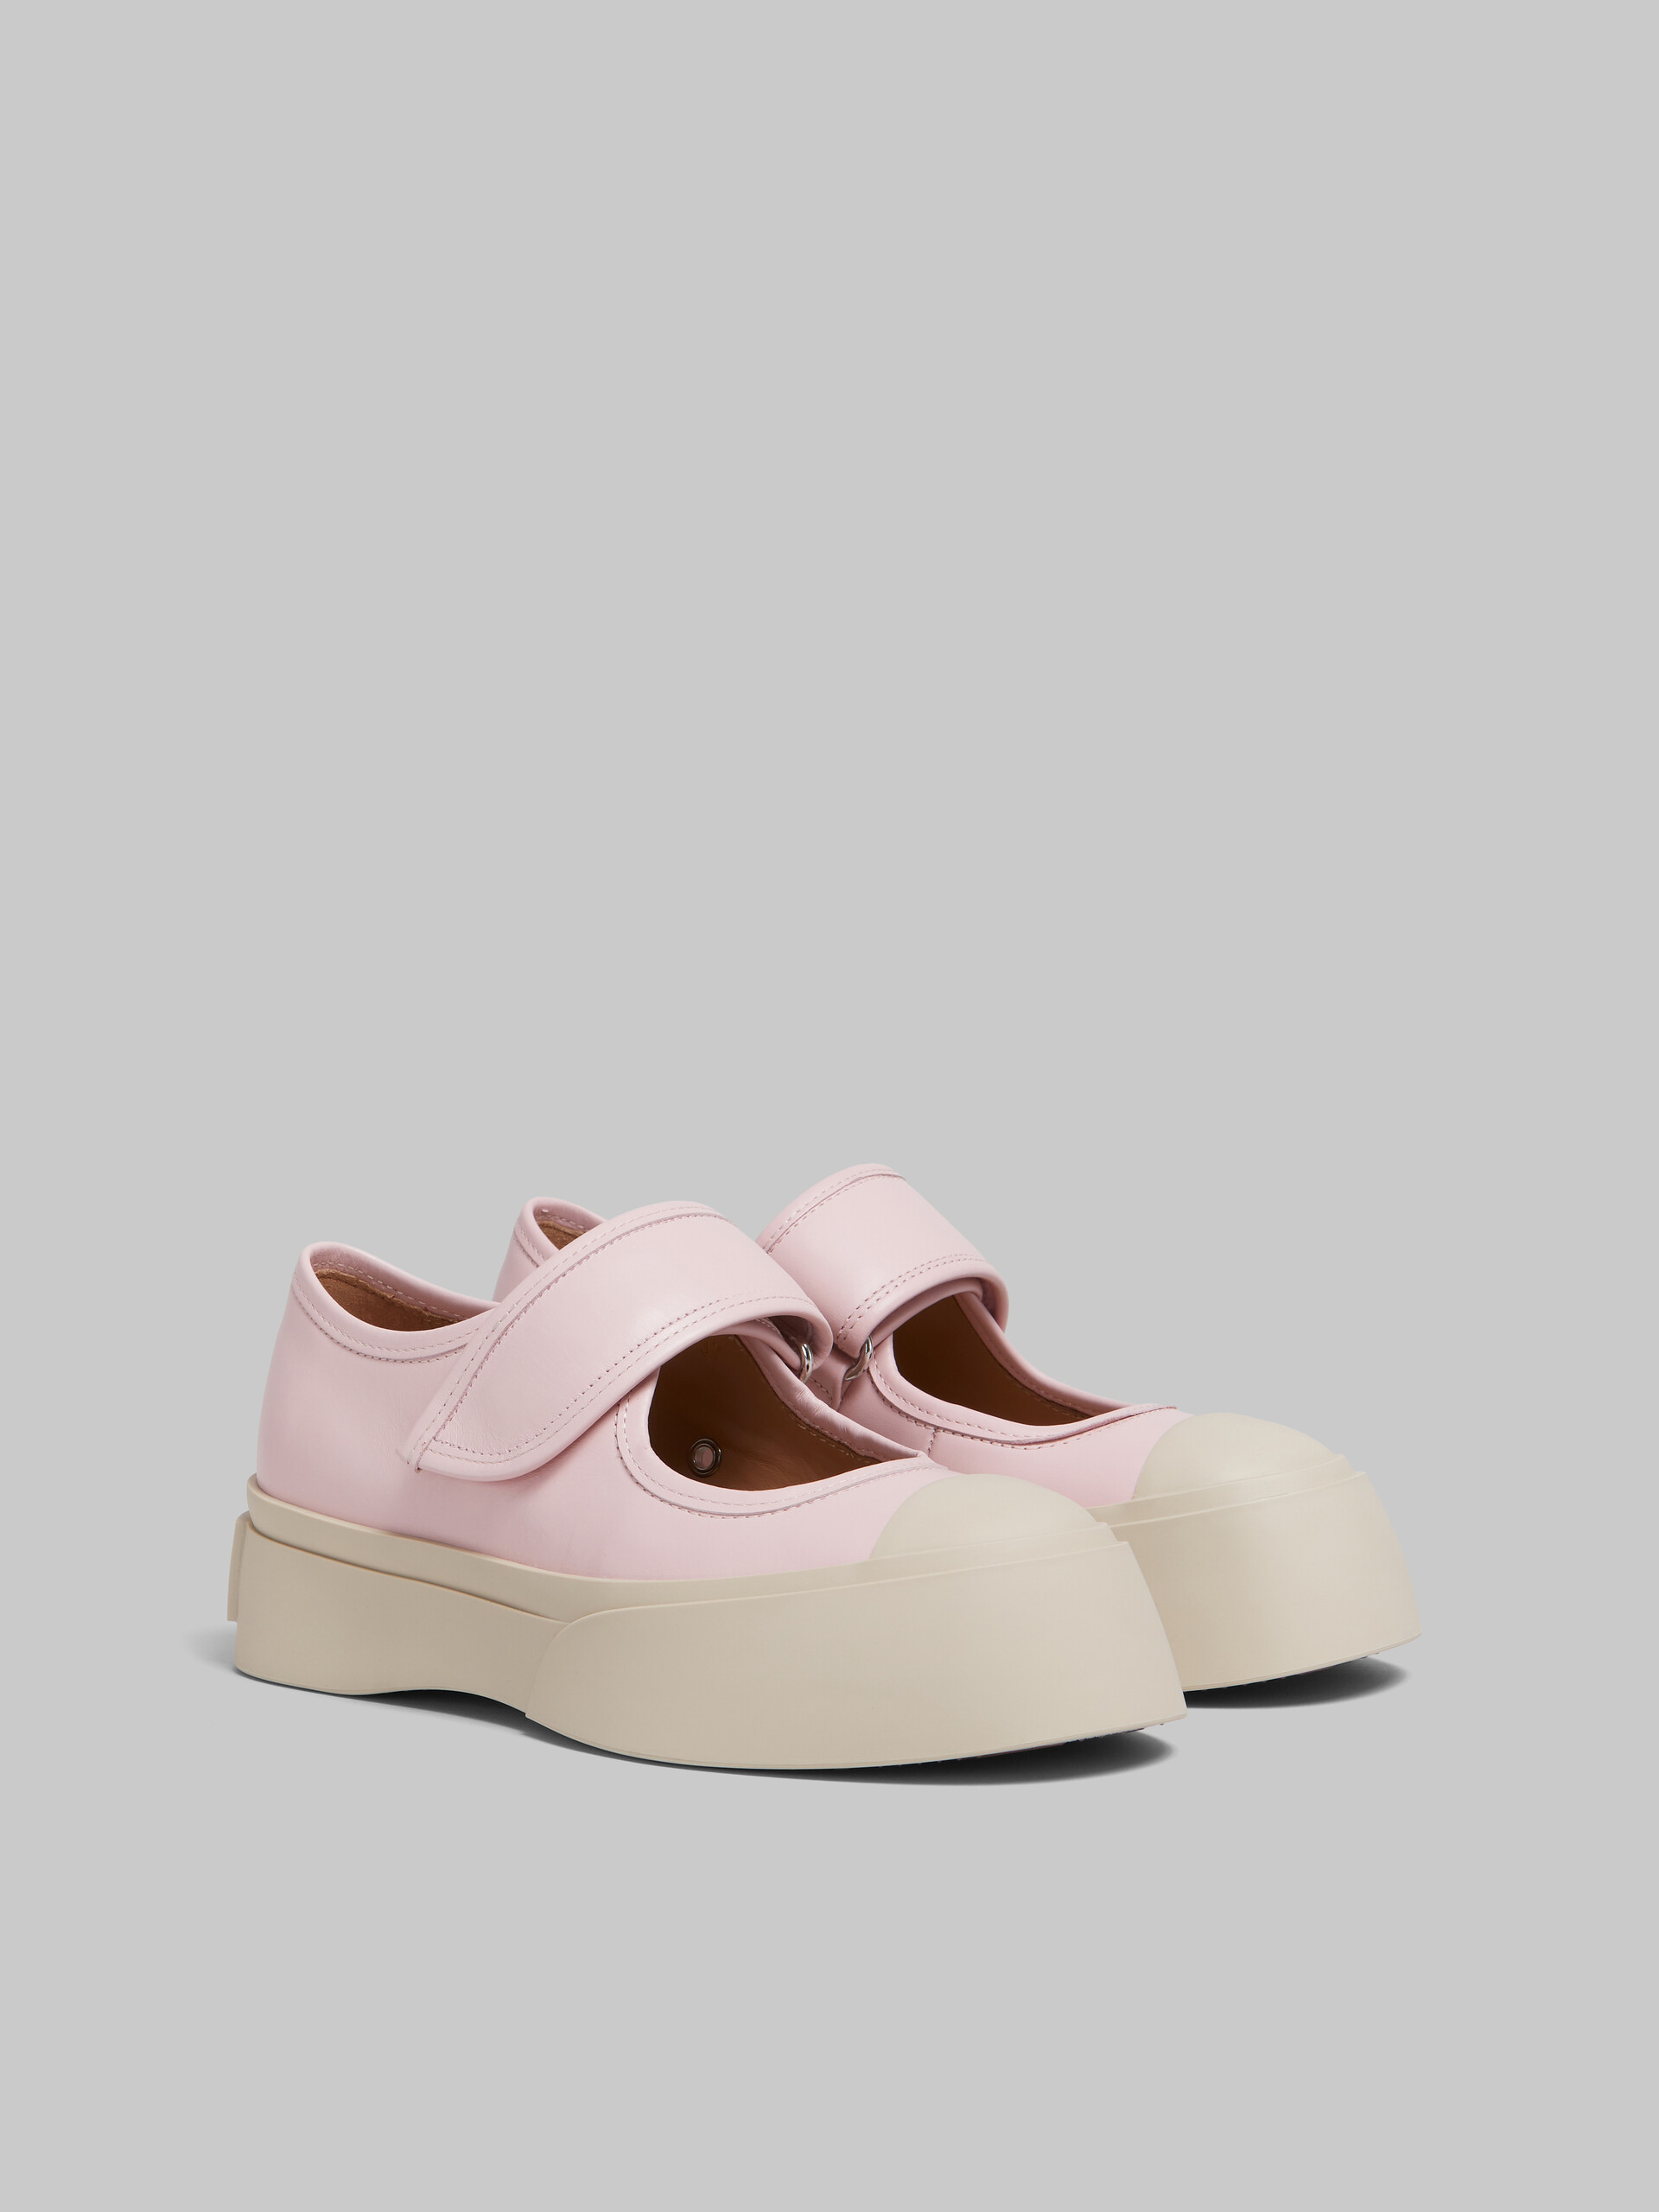 Light pink nappa leather Mary Jane sneaker - Sneakers - Image 2